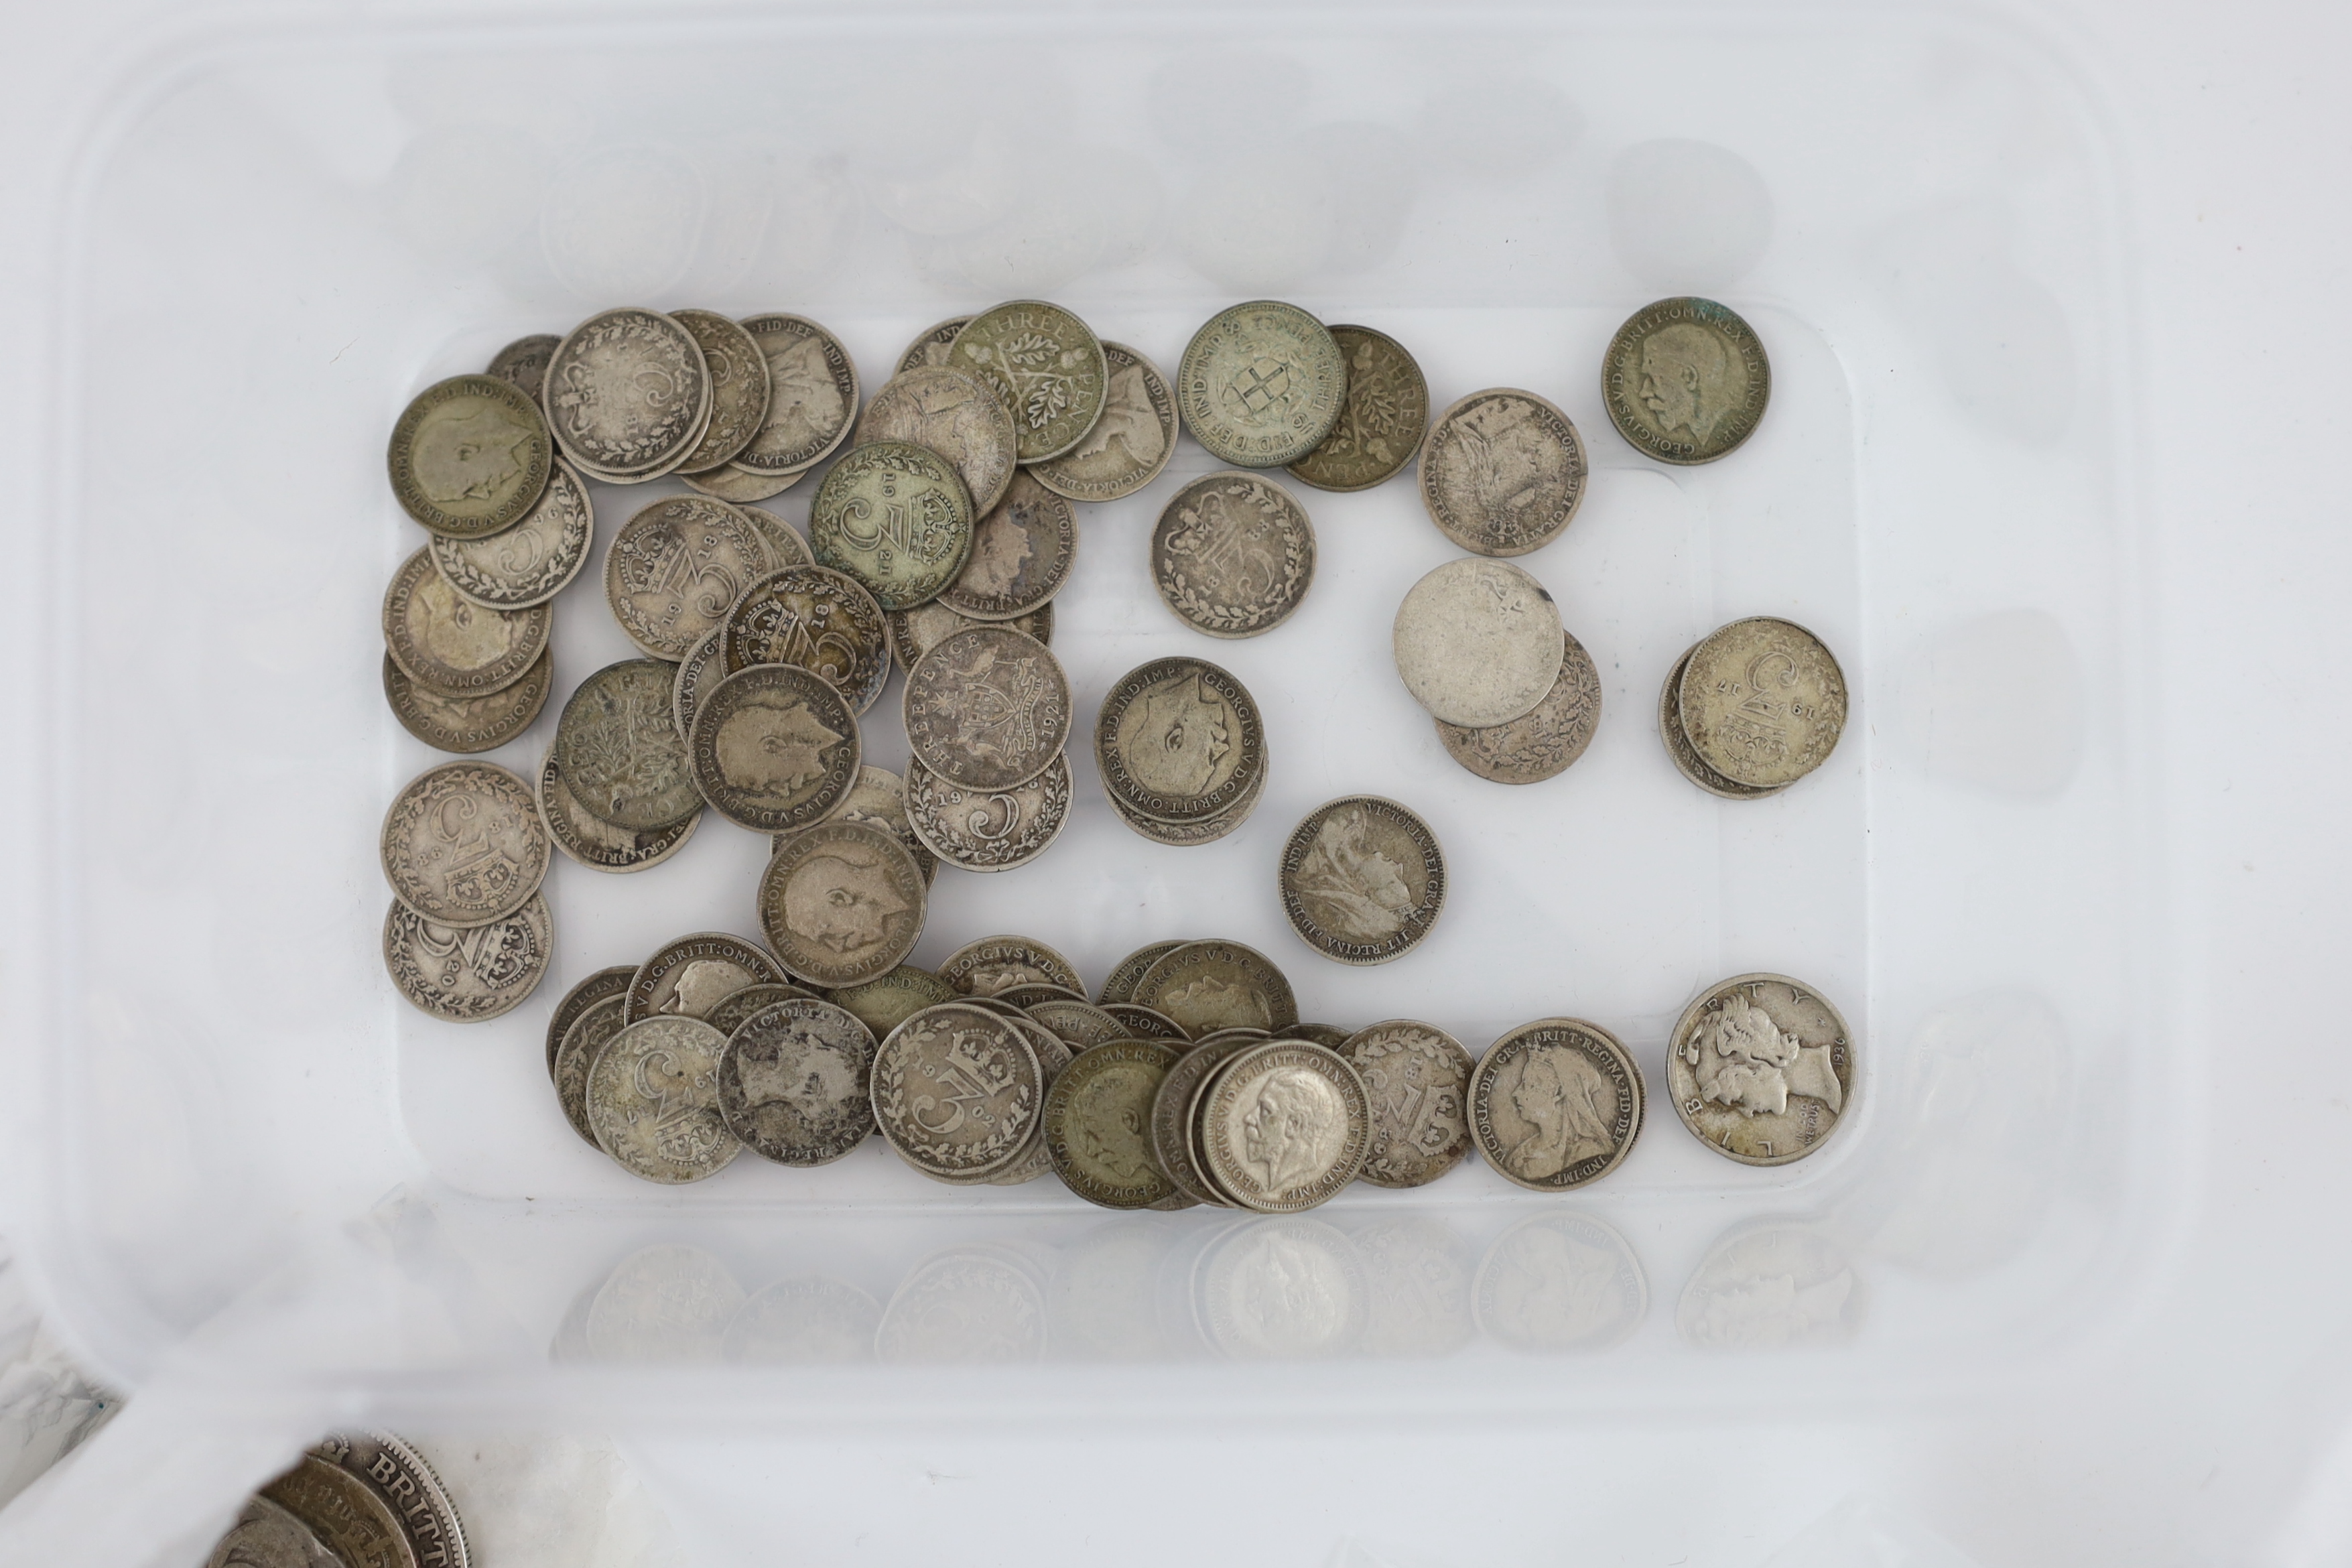 British and World coins, mostly silver including - 1670, 1695 and 1888 crowns, William IV to - Image 3 of 3